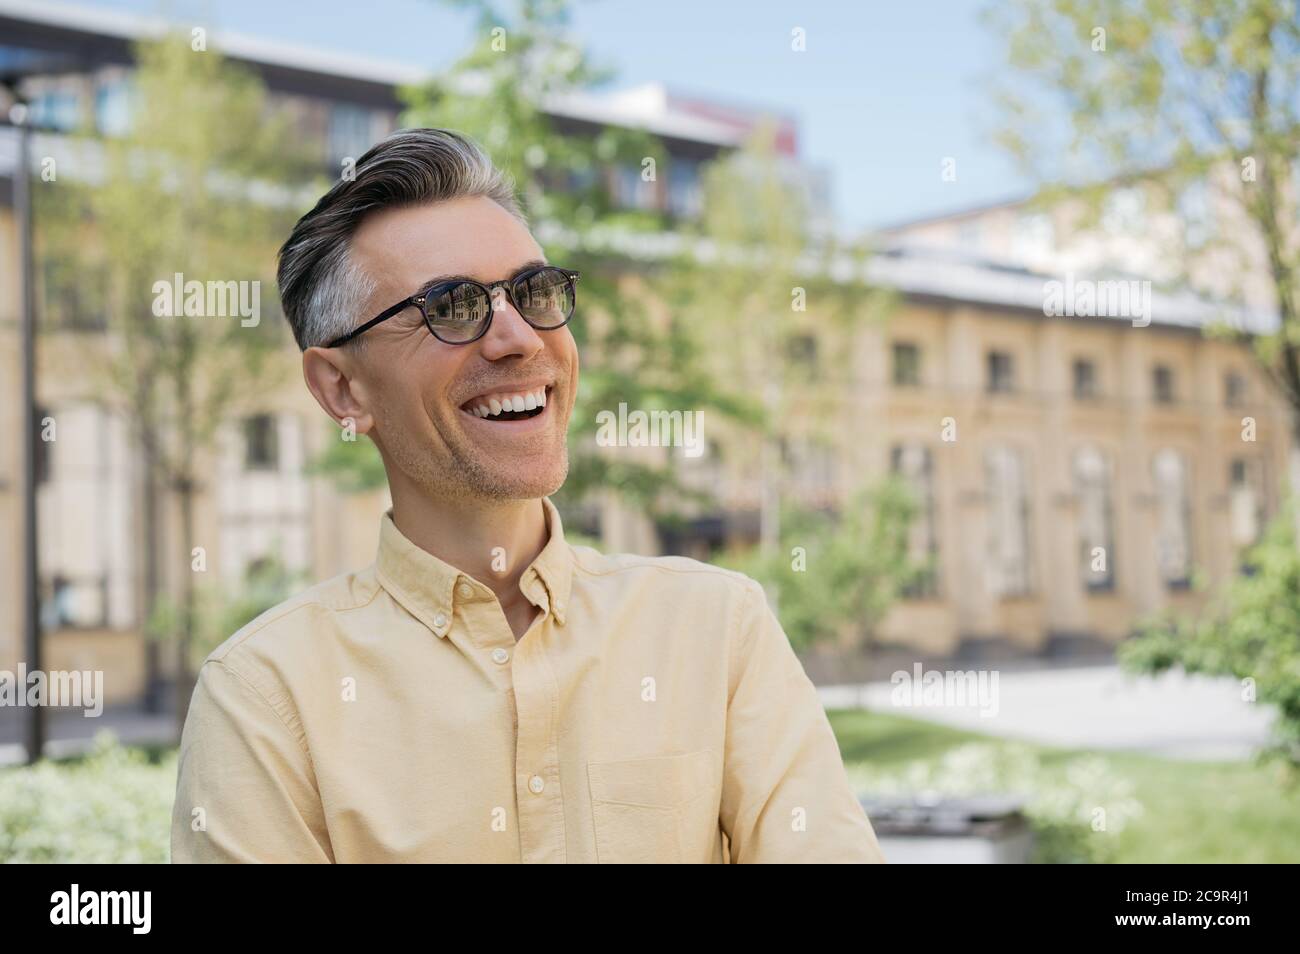 Portrait of handsome mature man wearing stylish eyeglasses, walking on the street, laughing. Positive lifestyle concept Stock Photo